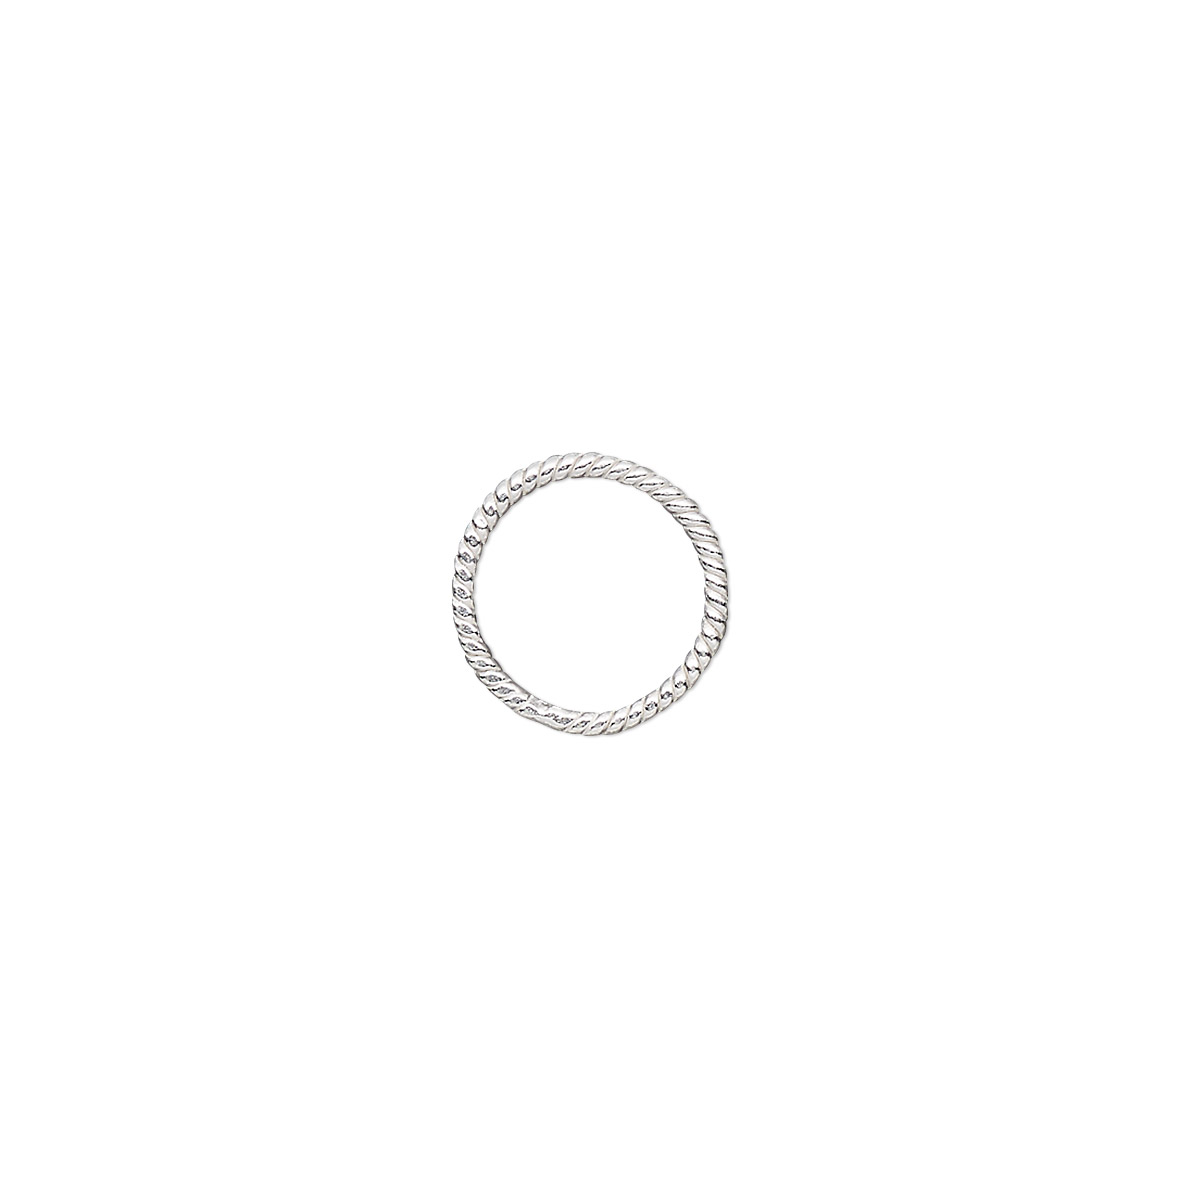 Jump ring, sterling silver, 11mm soldered twisted round, 9mm inside ...